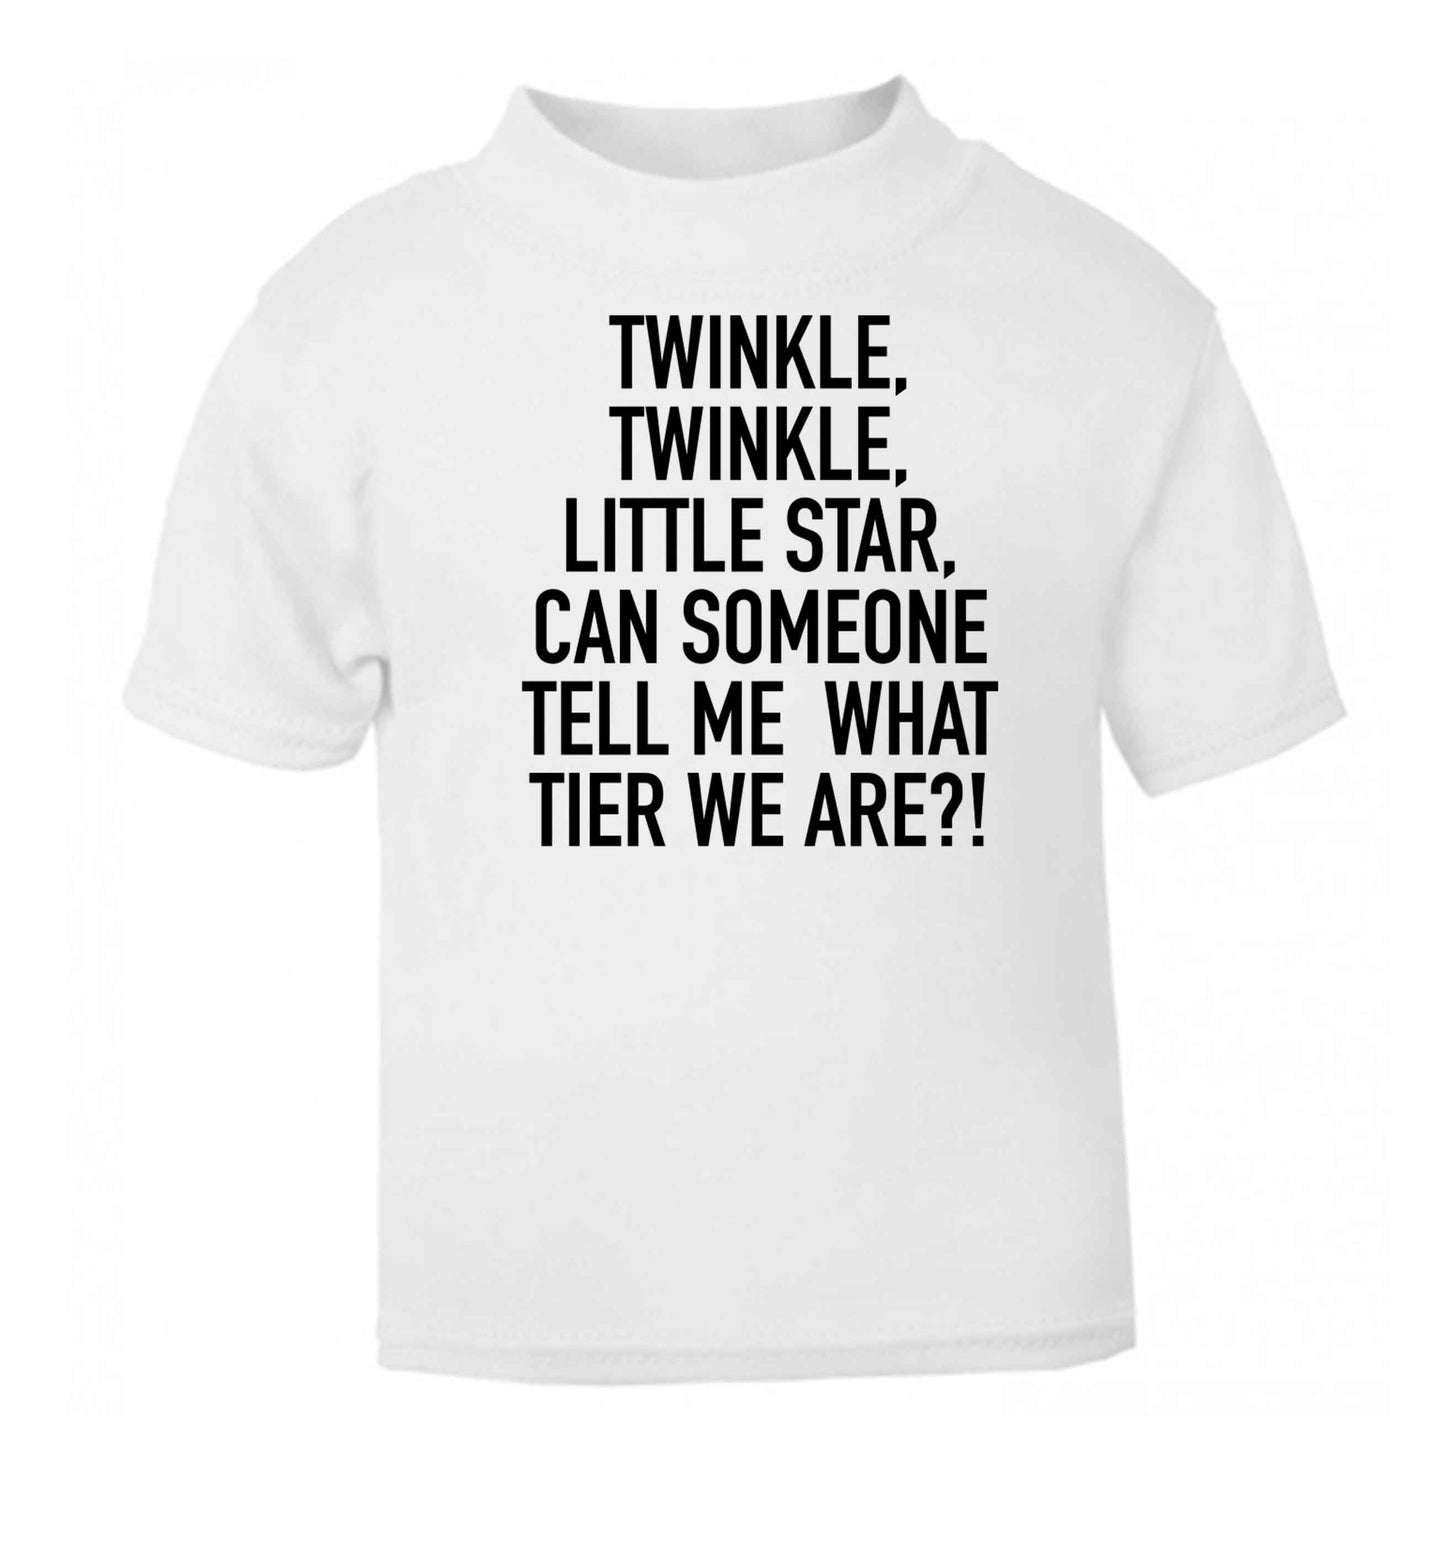 Twinkle twinkle, little star does anyone know what tier we are? baby toddler Tshirt 2 Years